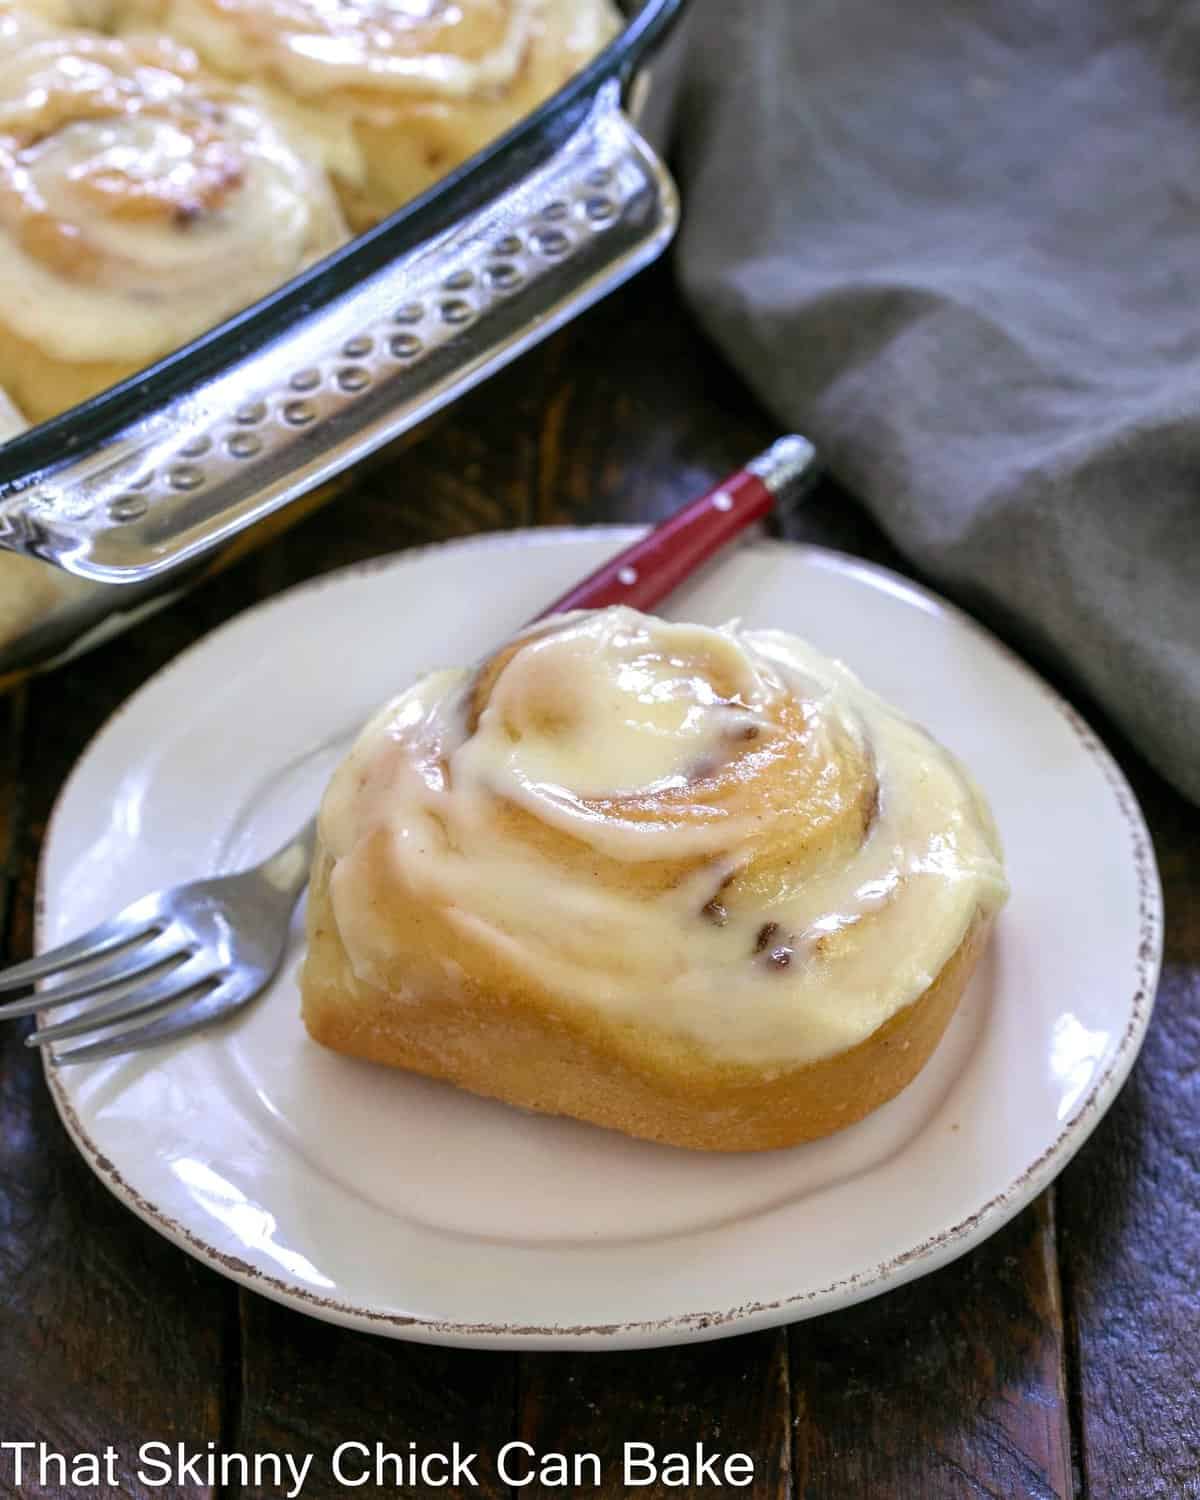 One cinnamon roll on a white plate in front of pan of rolls.